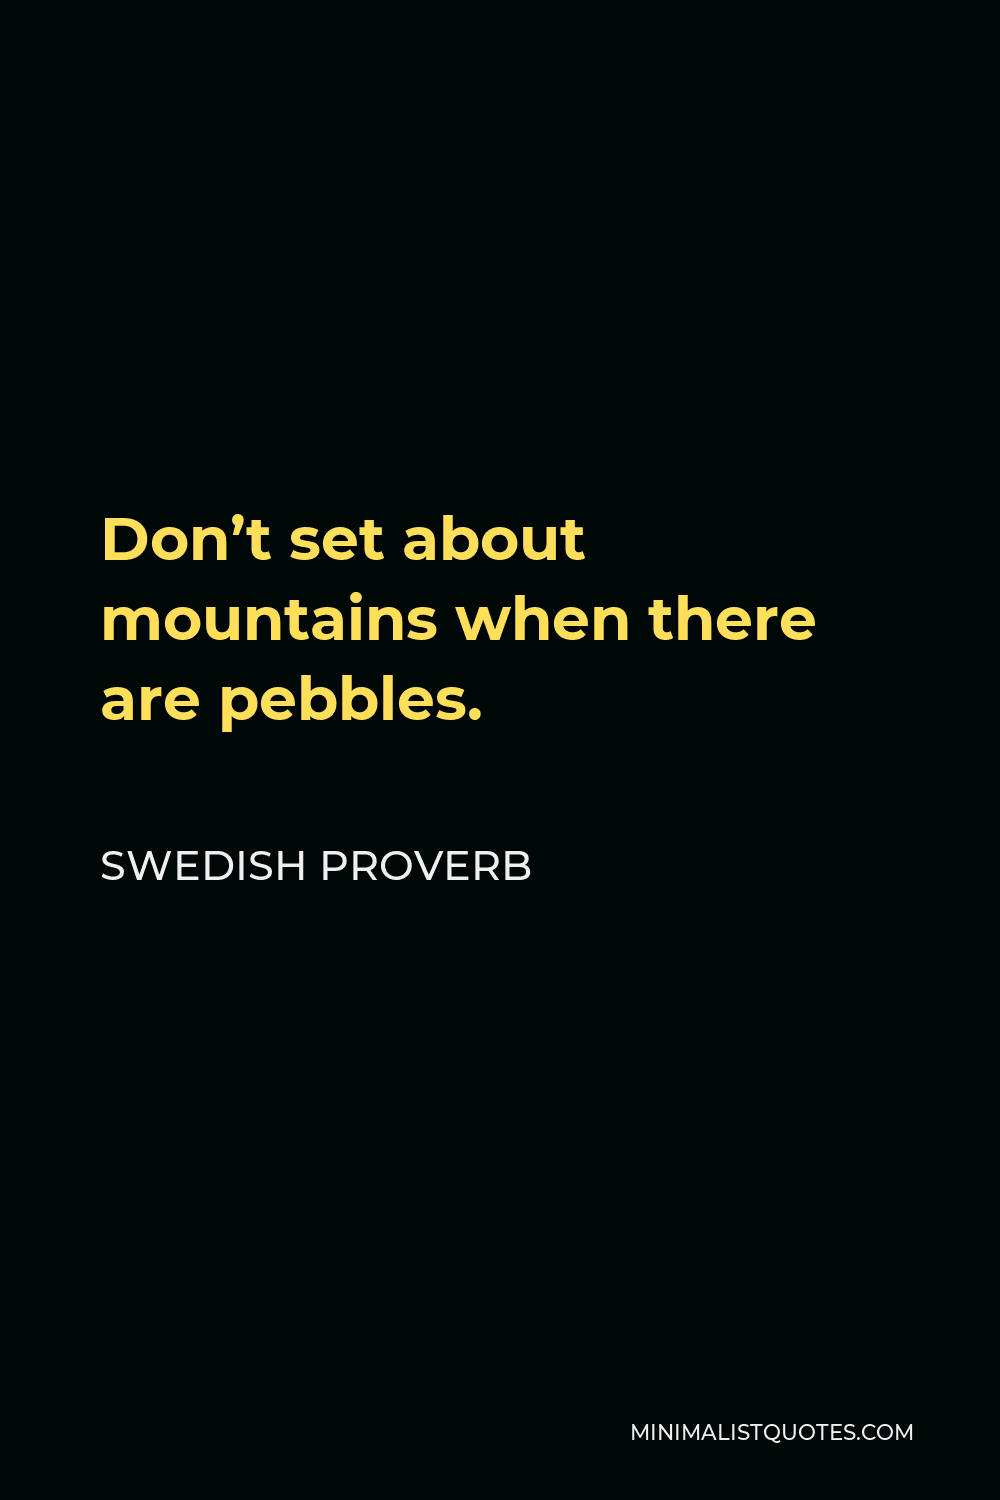 Swedish Proverb Quote - Don’t set about mountains when there are pebbles.